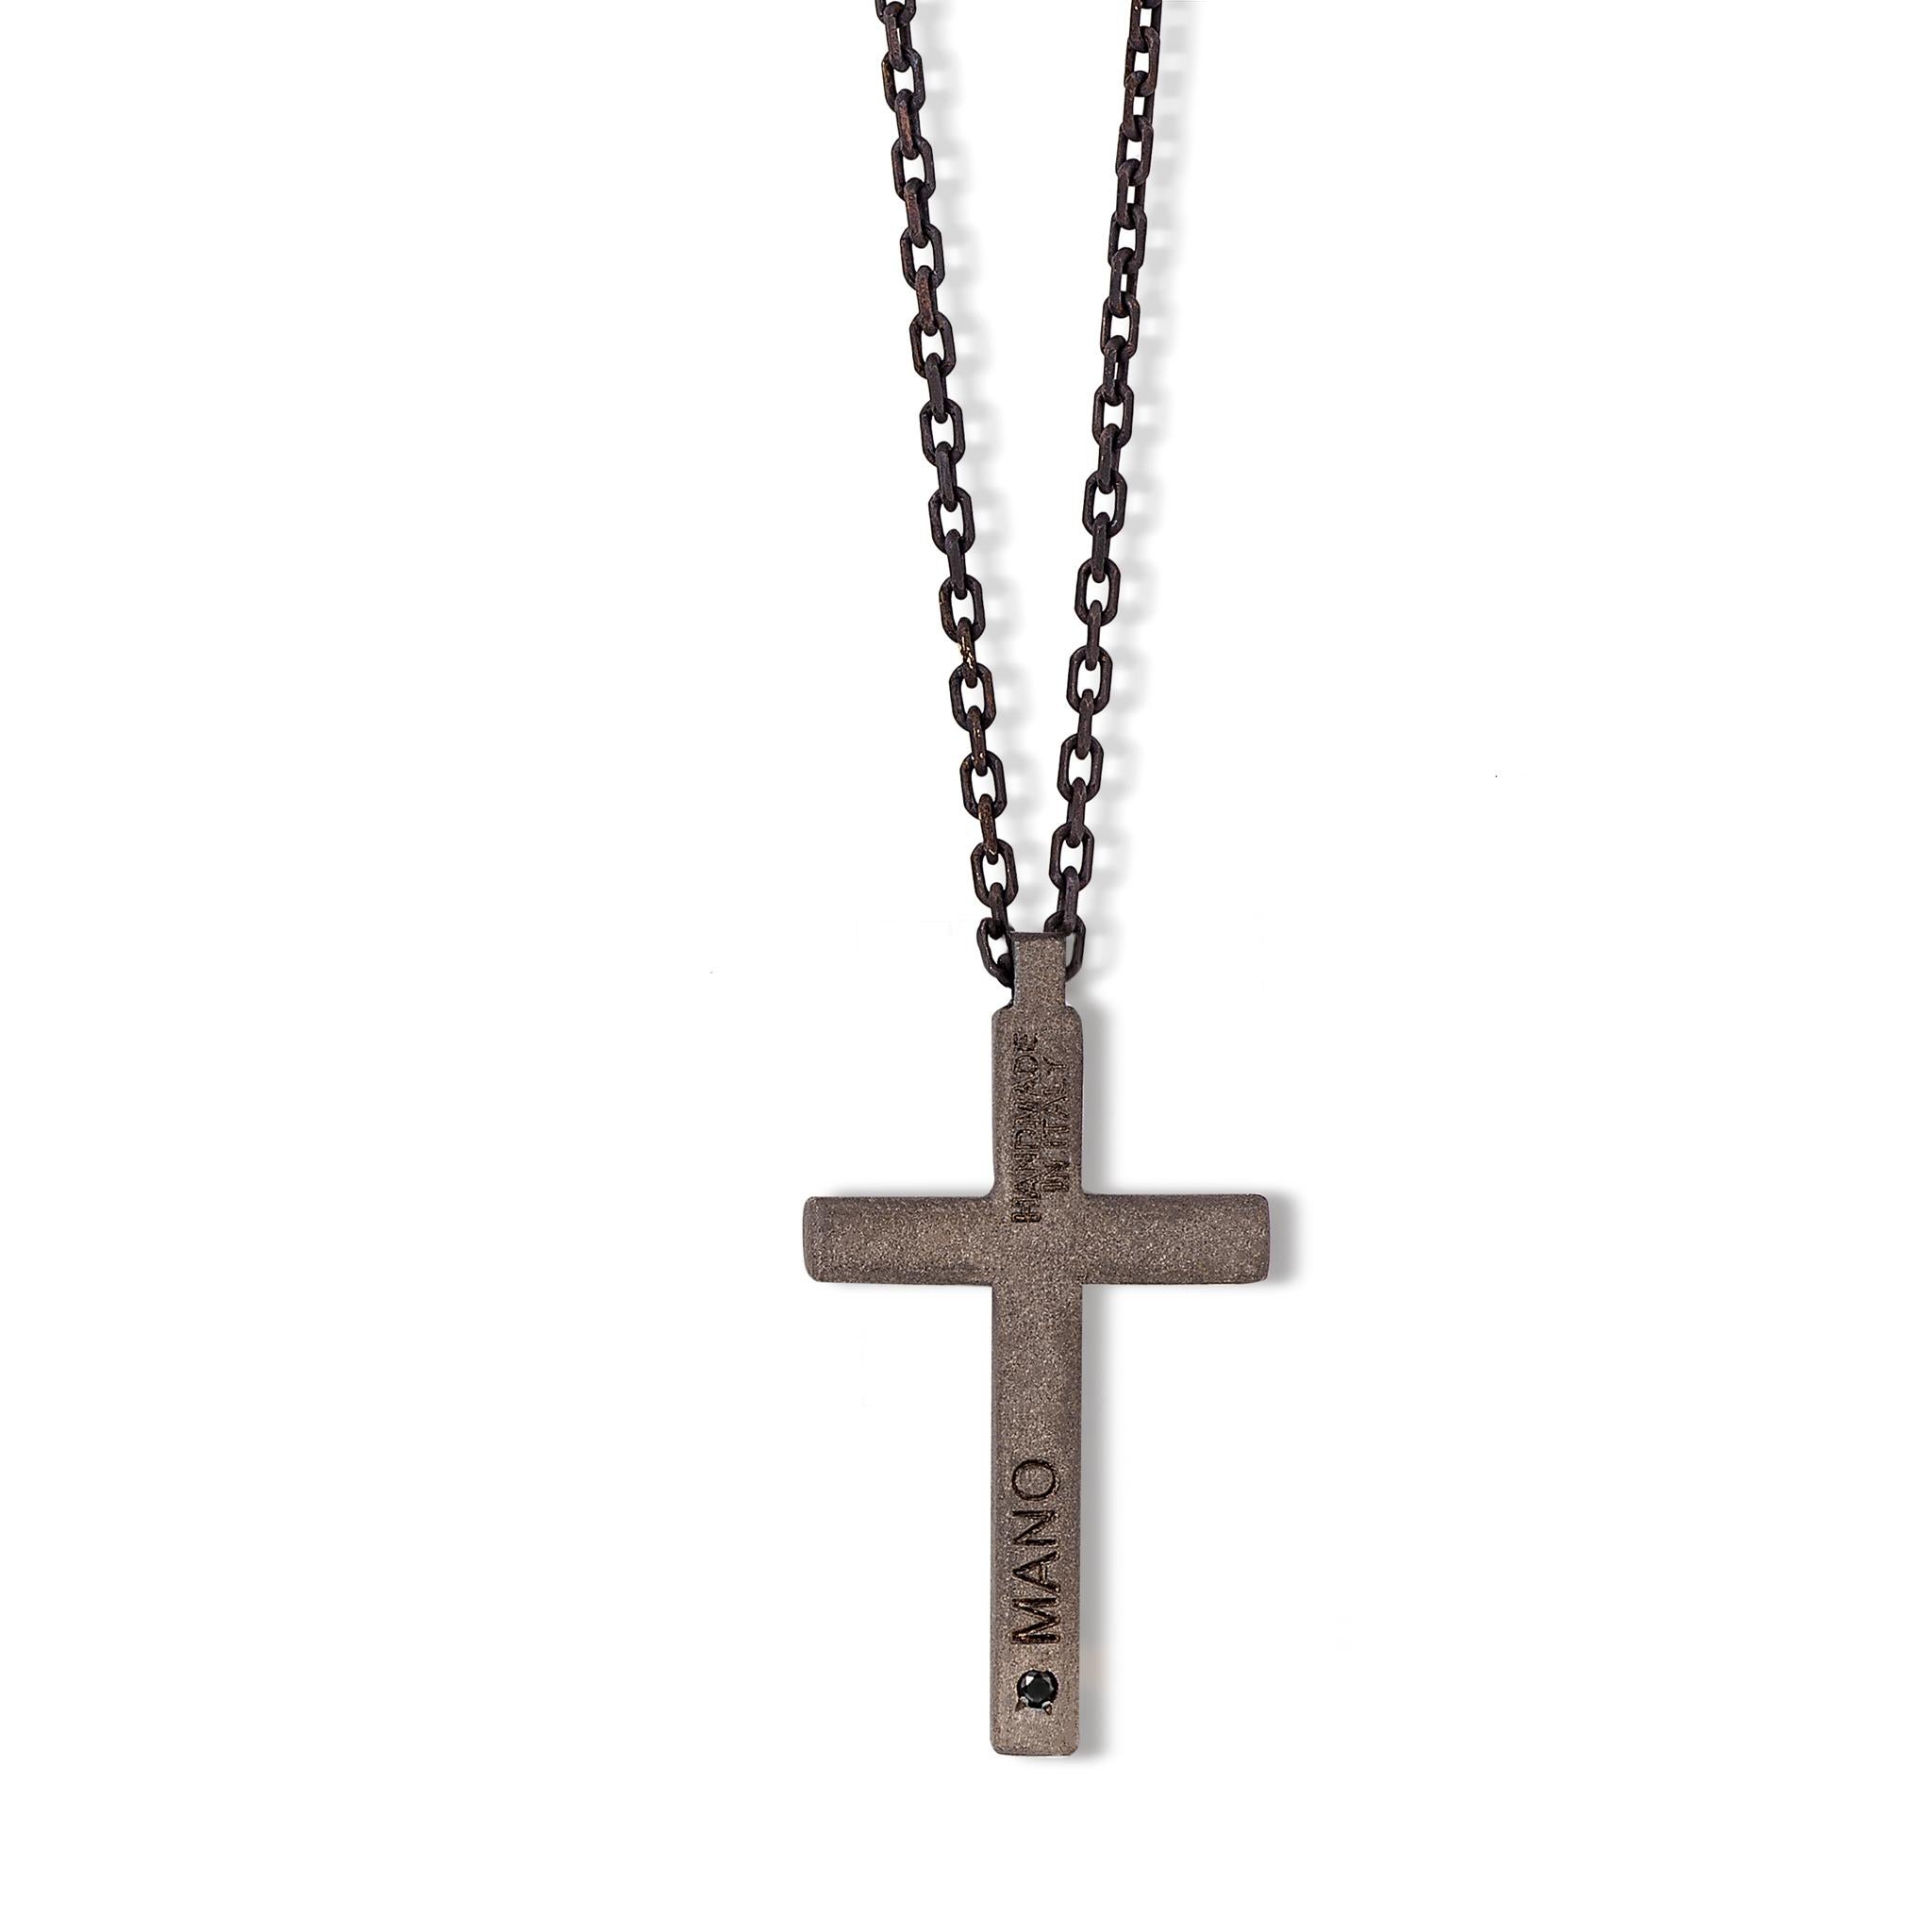 Men's Minimal necklace in titanium, black diamonds, 9 kt red gold. On the titanium cross, the central part of this necklace, are set 12 black diamonds for a total carat of 12 points, while on the back is a 1-point black diamond, a precious detail of